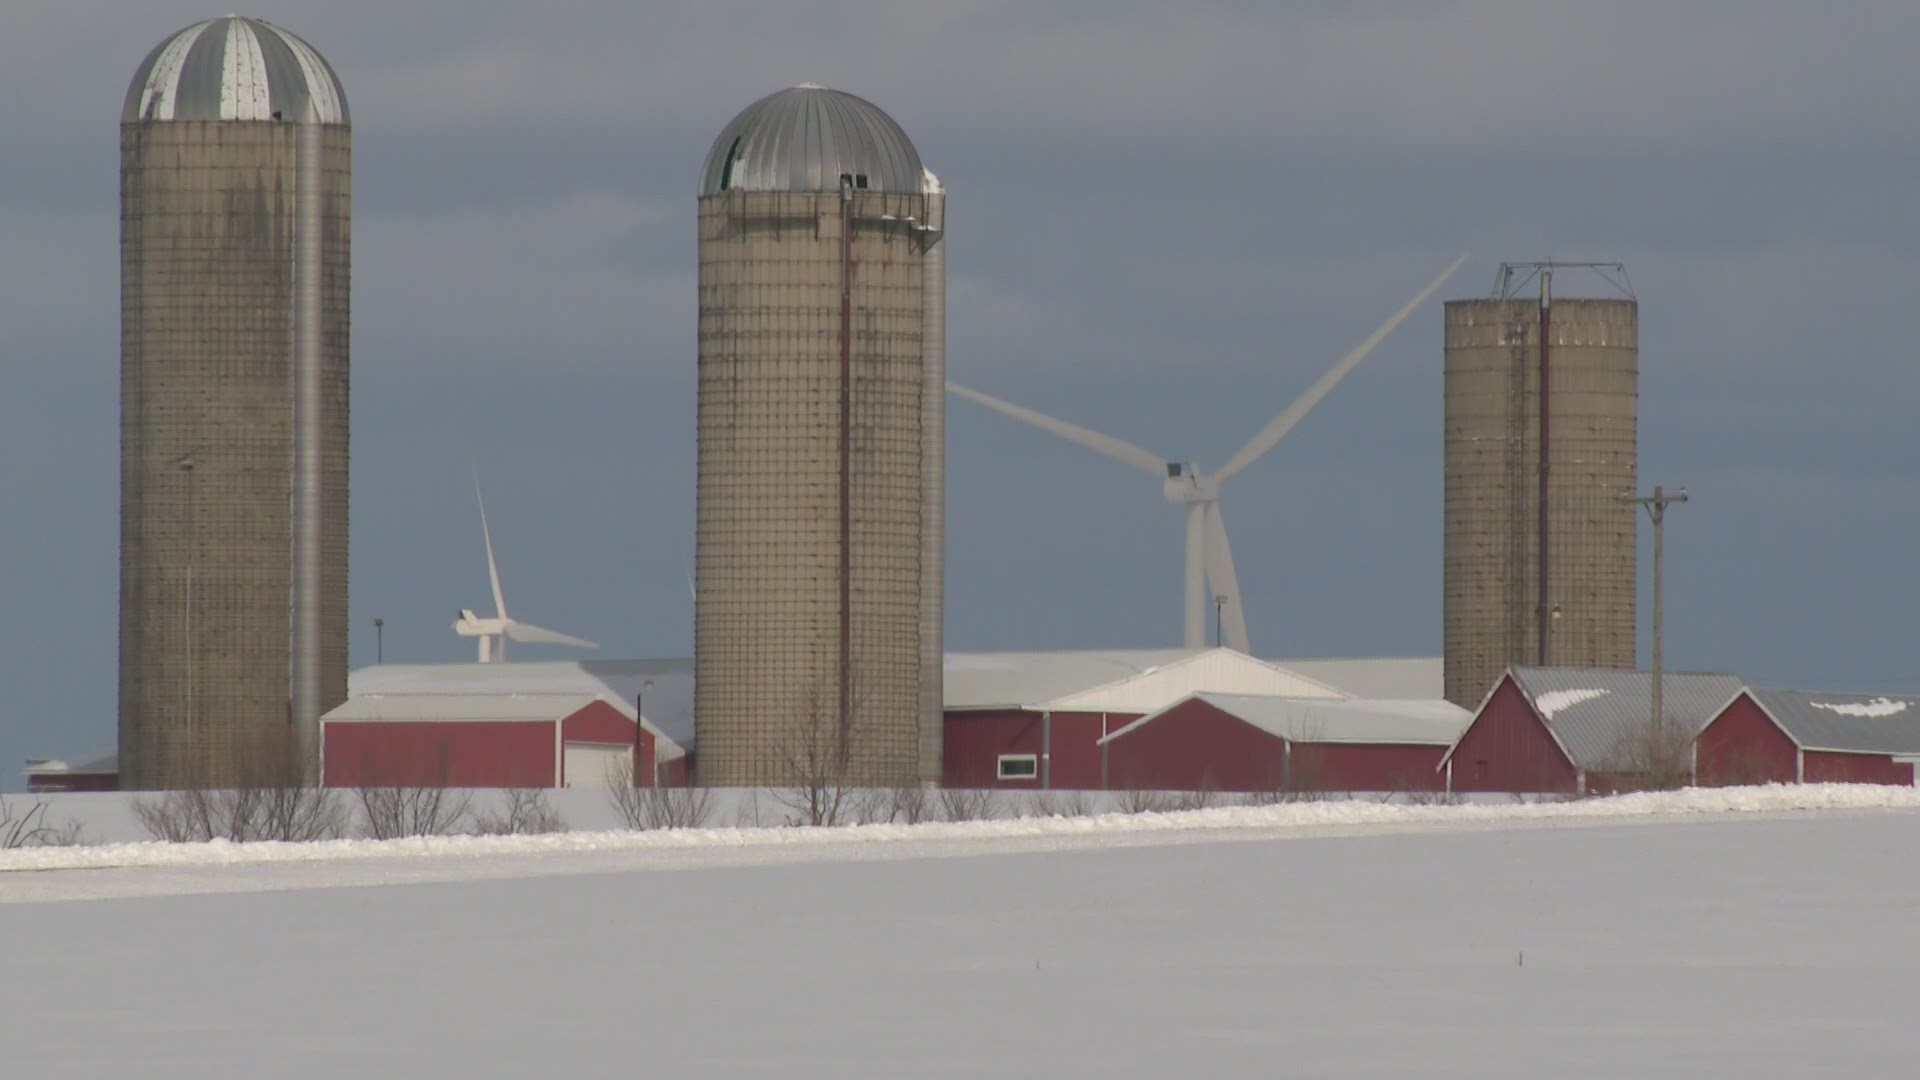 Consumers Energy's wind park is operational even in freezing cold temperatures.